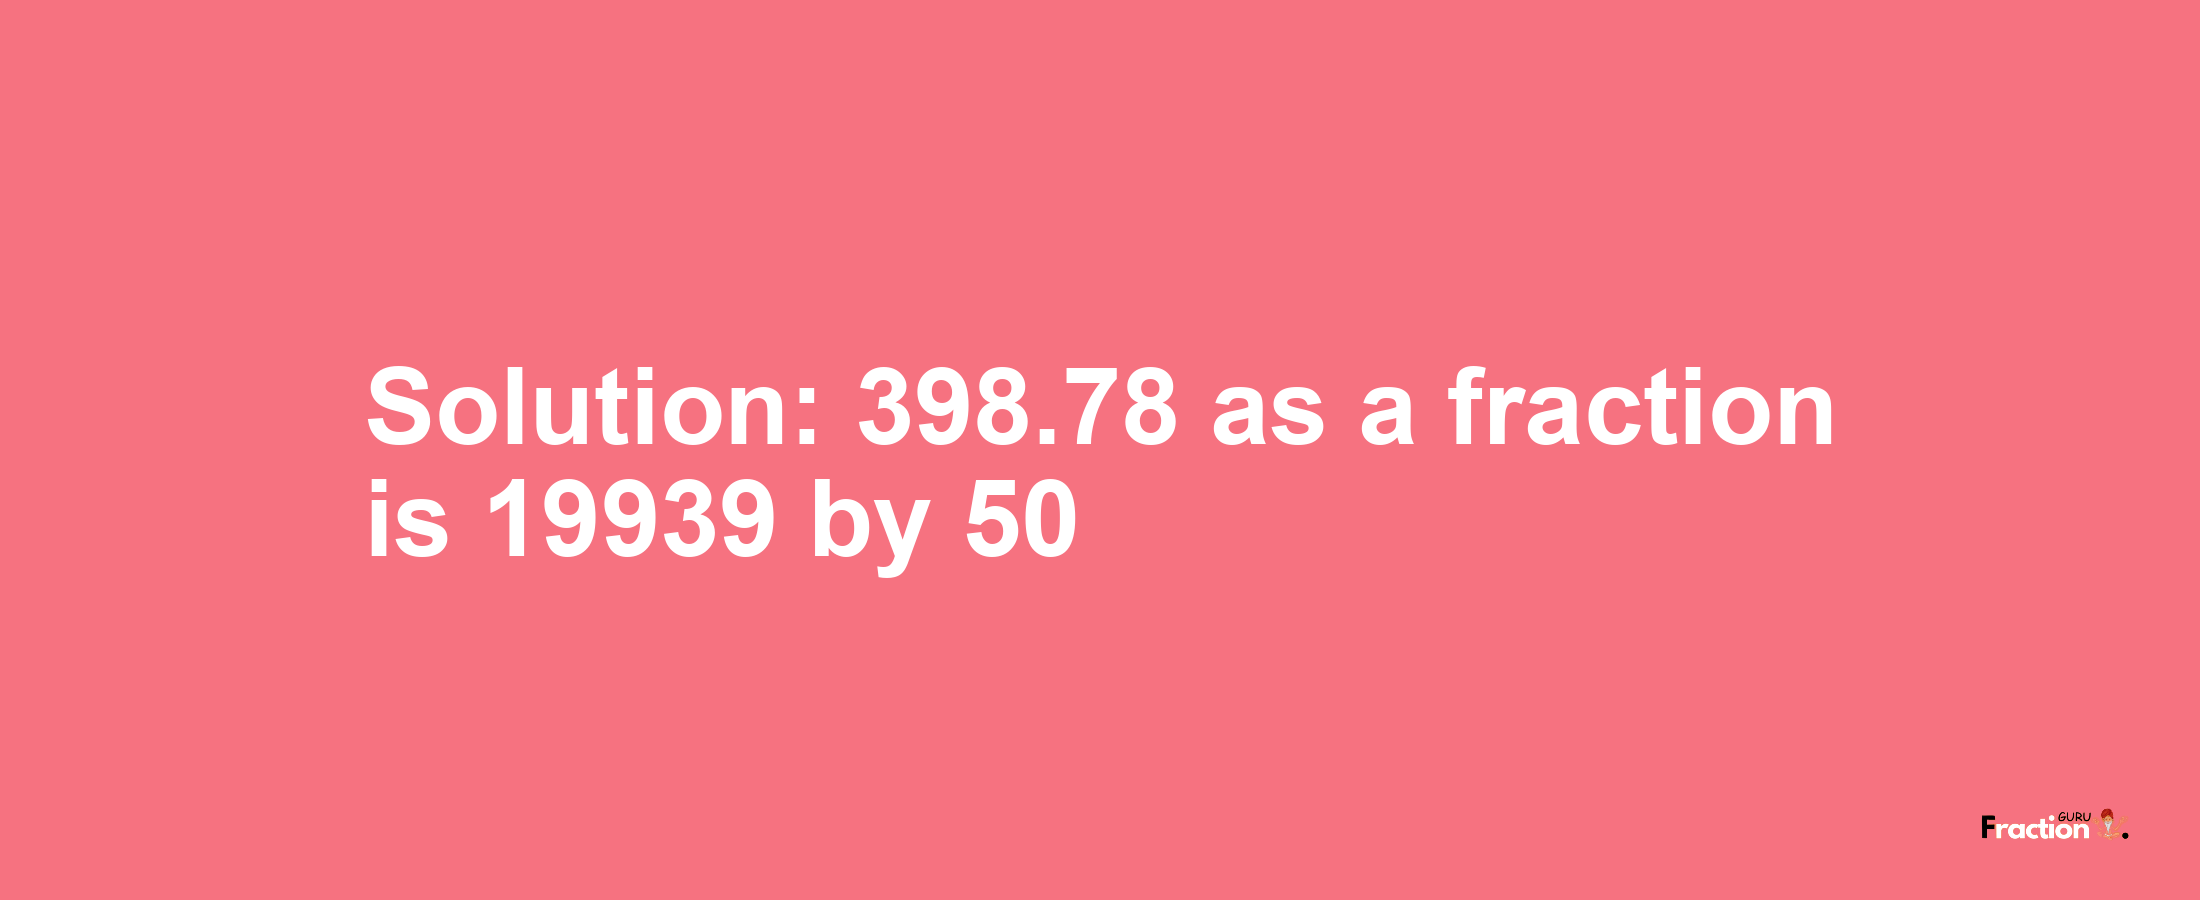 Solution:398.78 as a fraction is 19939/50